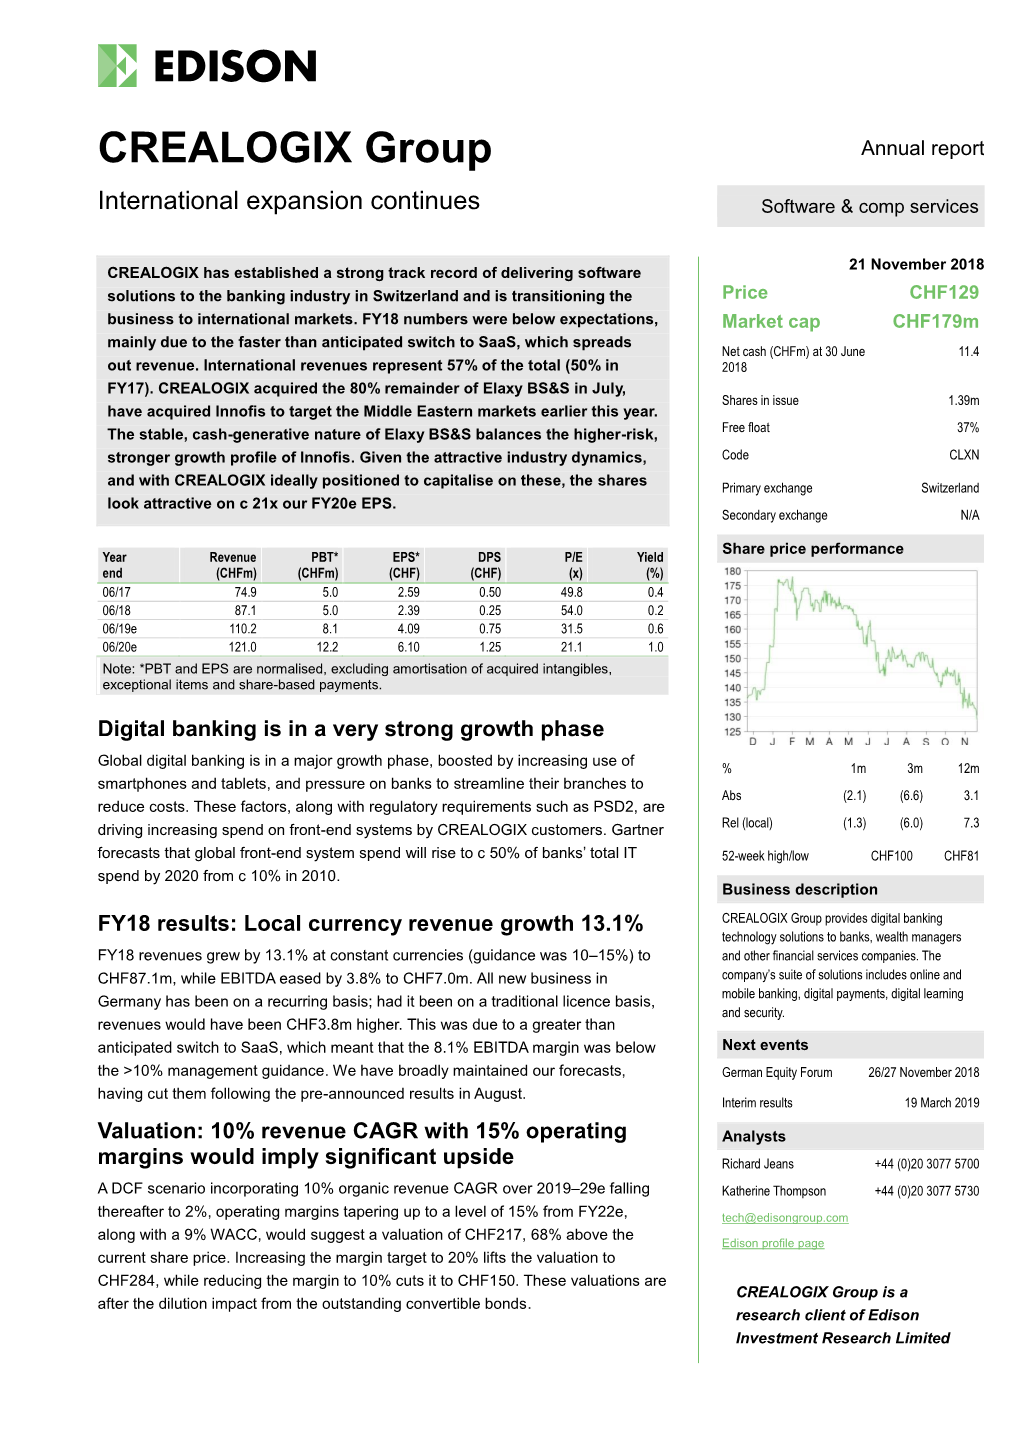 CREALOGIX Group Annual Report